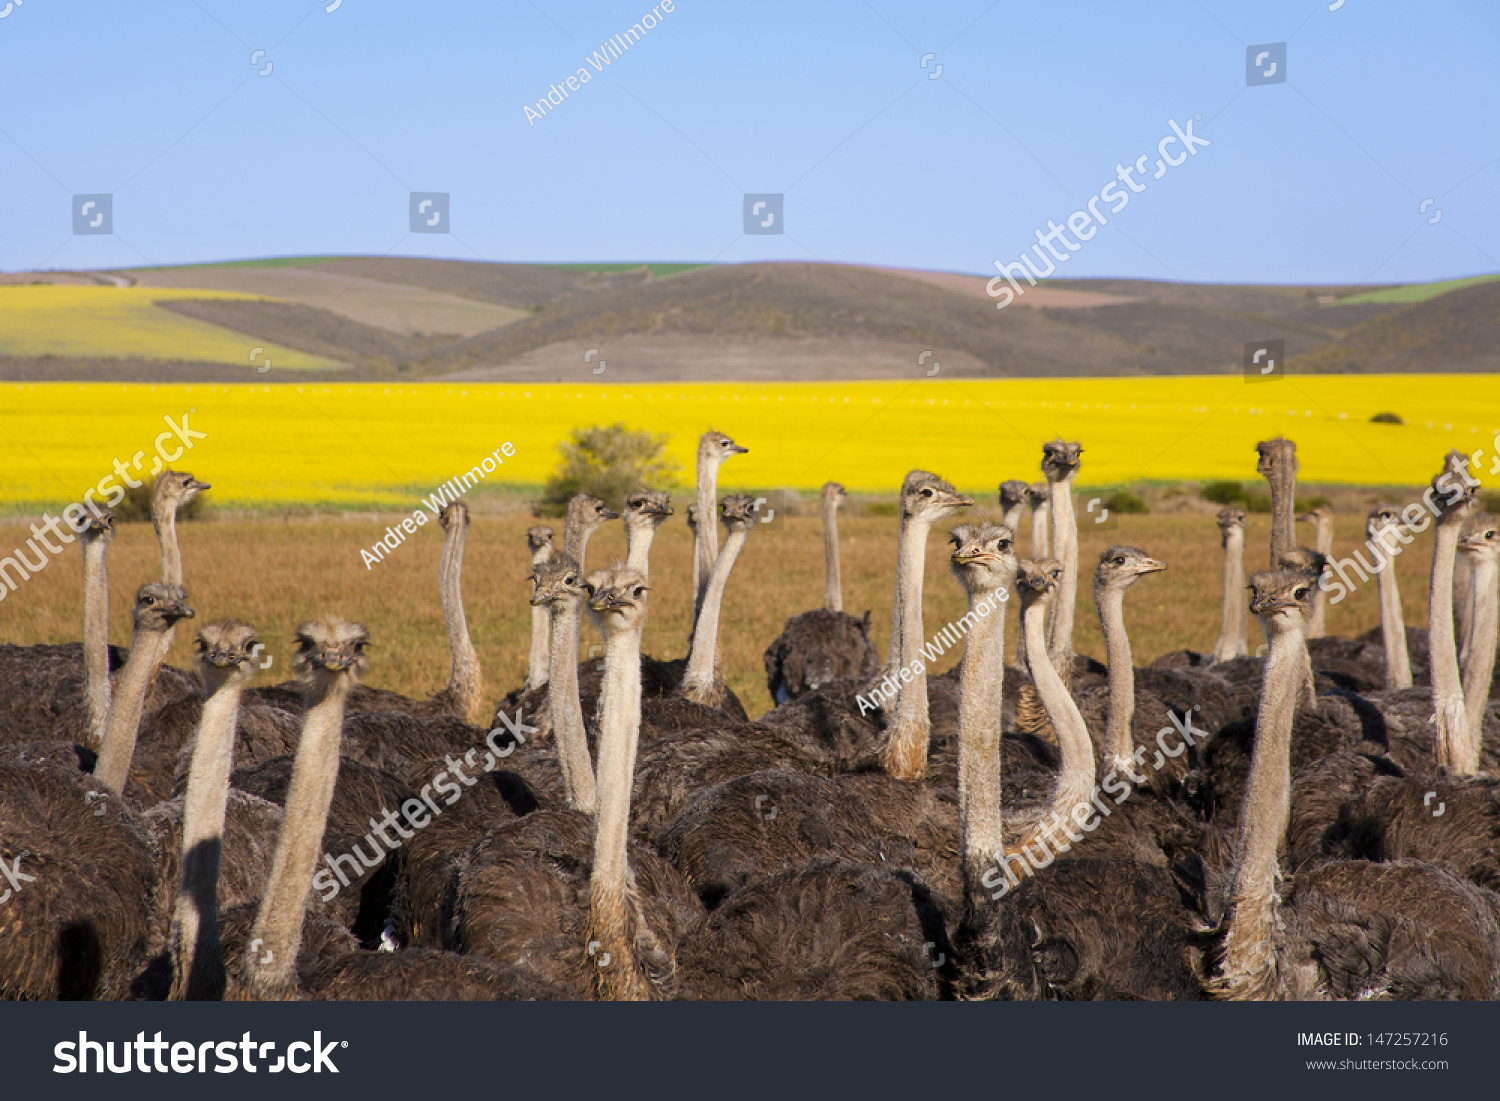 Group of ostriches along the Garden Route with yellow rapeseed fields in background, South Africa #147257216